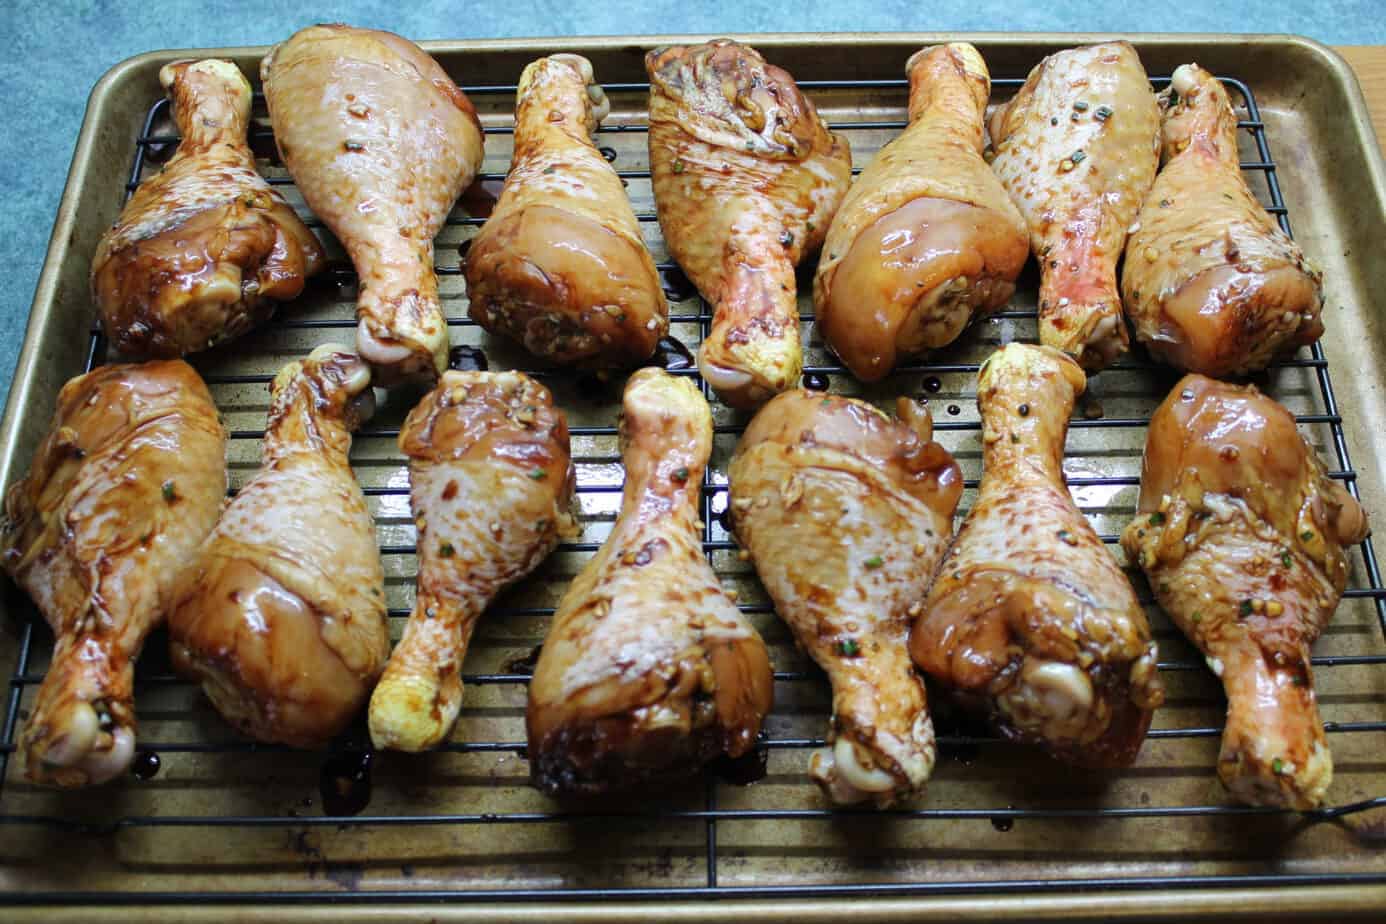 Balsamic and maple glazed, oven baked chicken drumsticks on a wire roasting rack